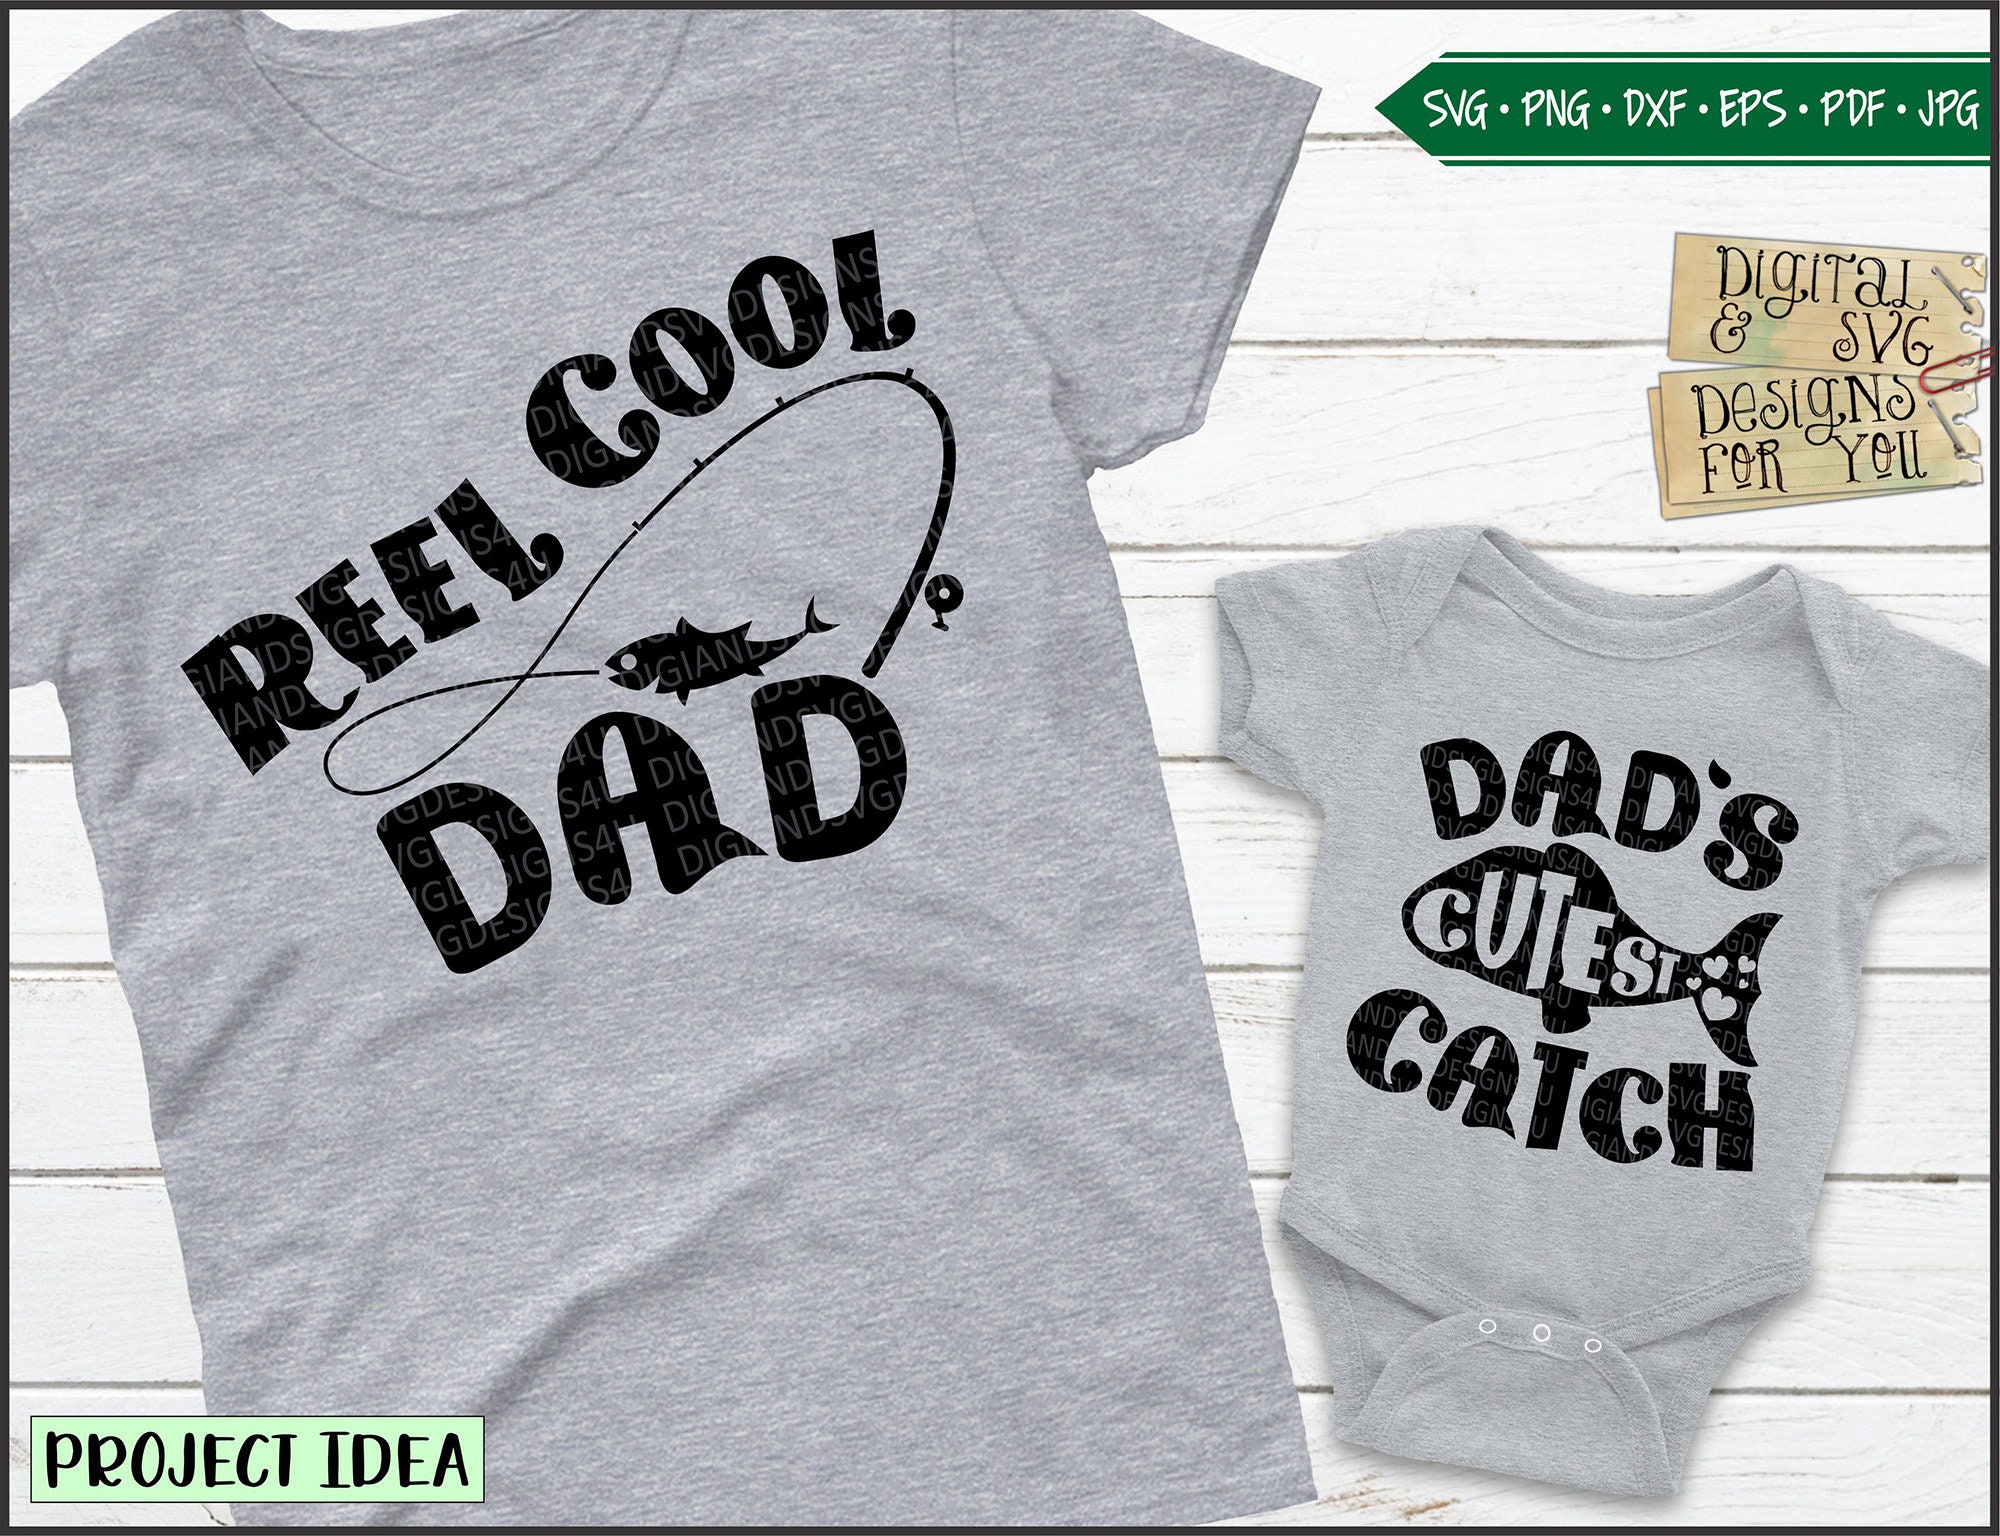 Reel Cool Dad Svg Dxf Png, Dad and Son Svg, Daddy and Me Svg, Fishing Dad,  Fishing Svg, Matching Shirts, Fathers Day Shirt, Fishing Pole 